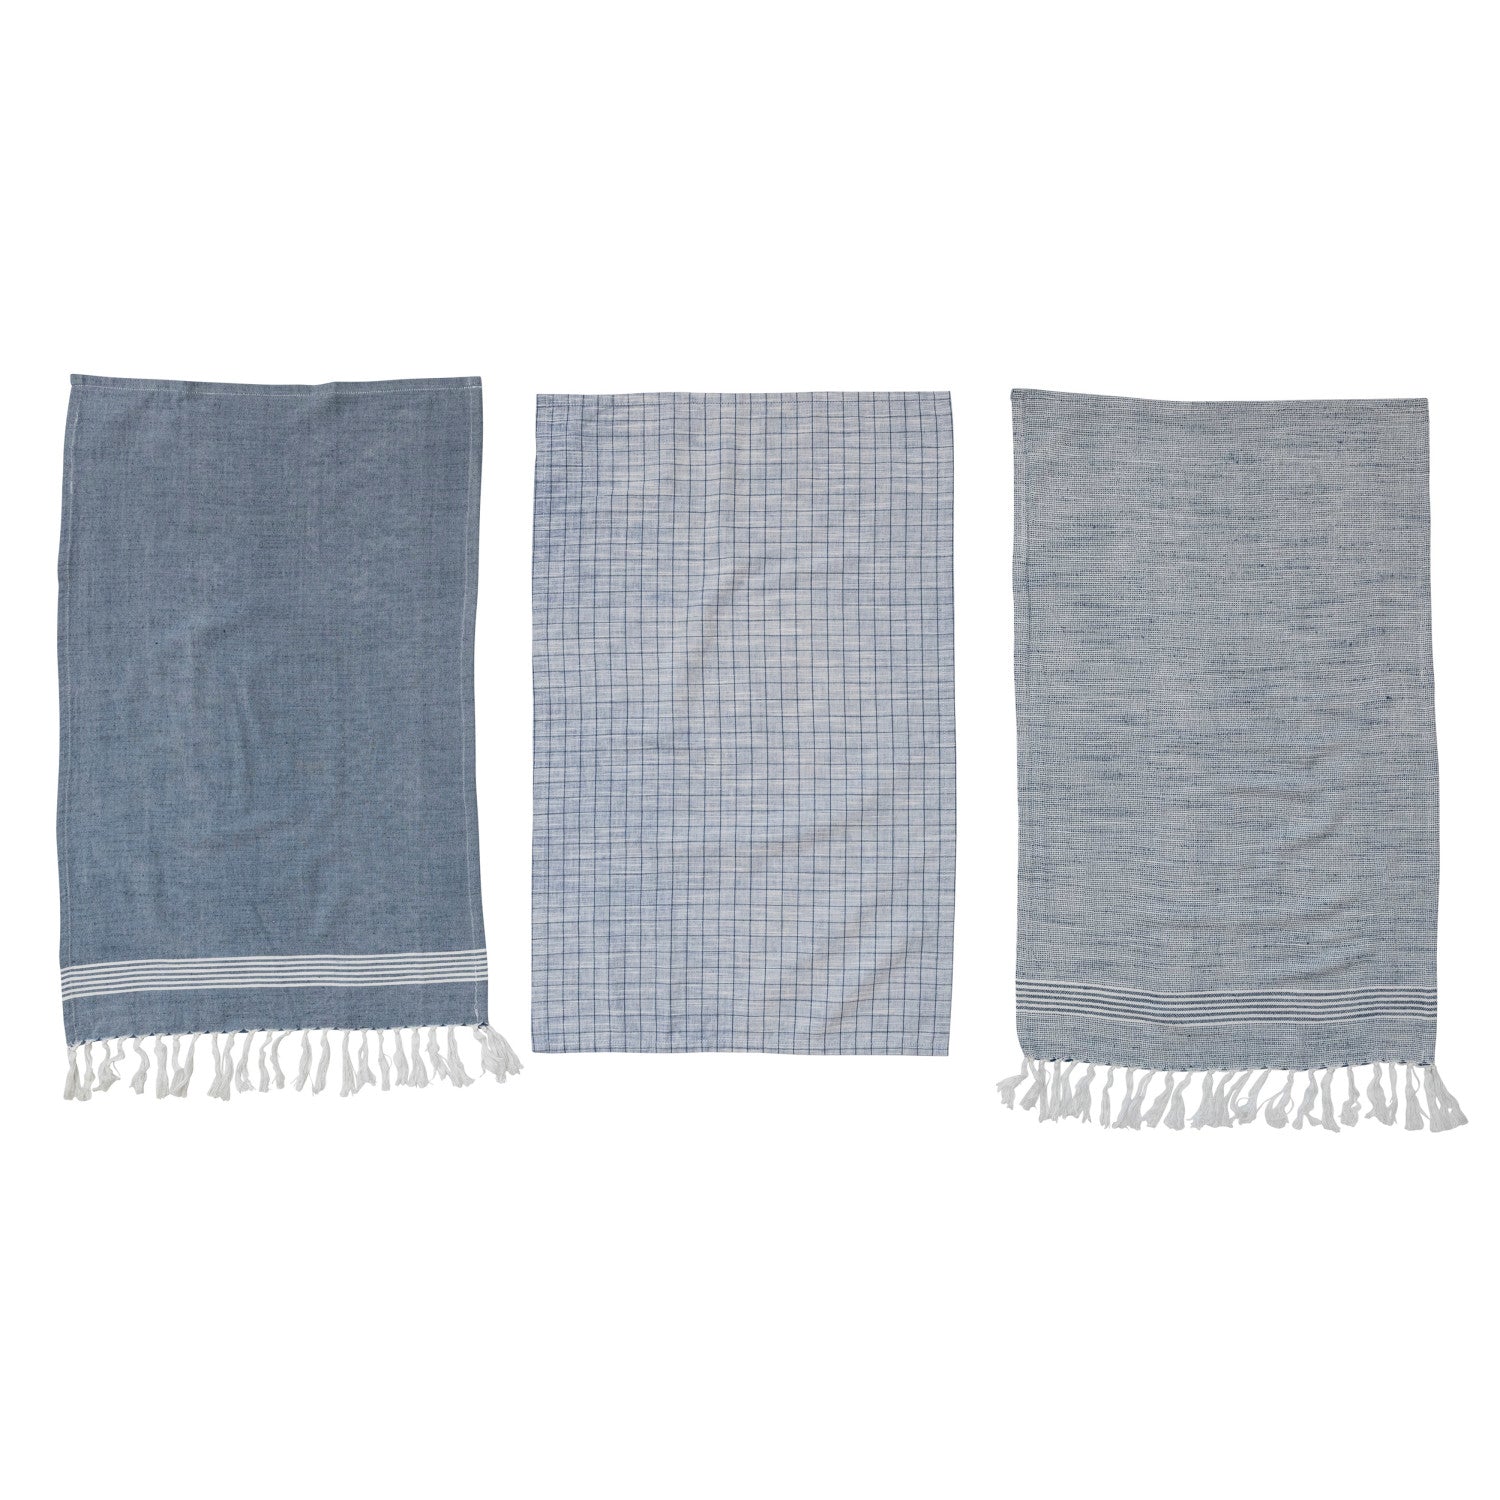 3 pc. Blue and White Patterned Cotton Blend Hammam Style Fringed Tea Towel Set